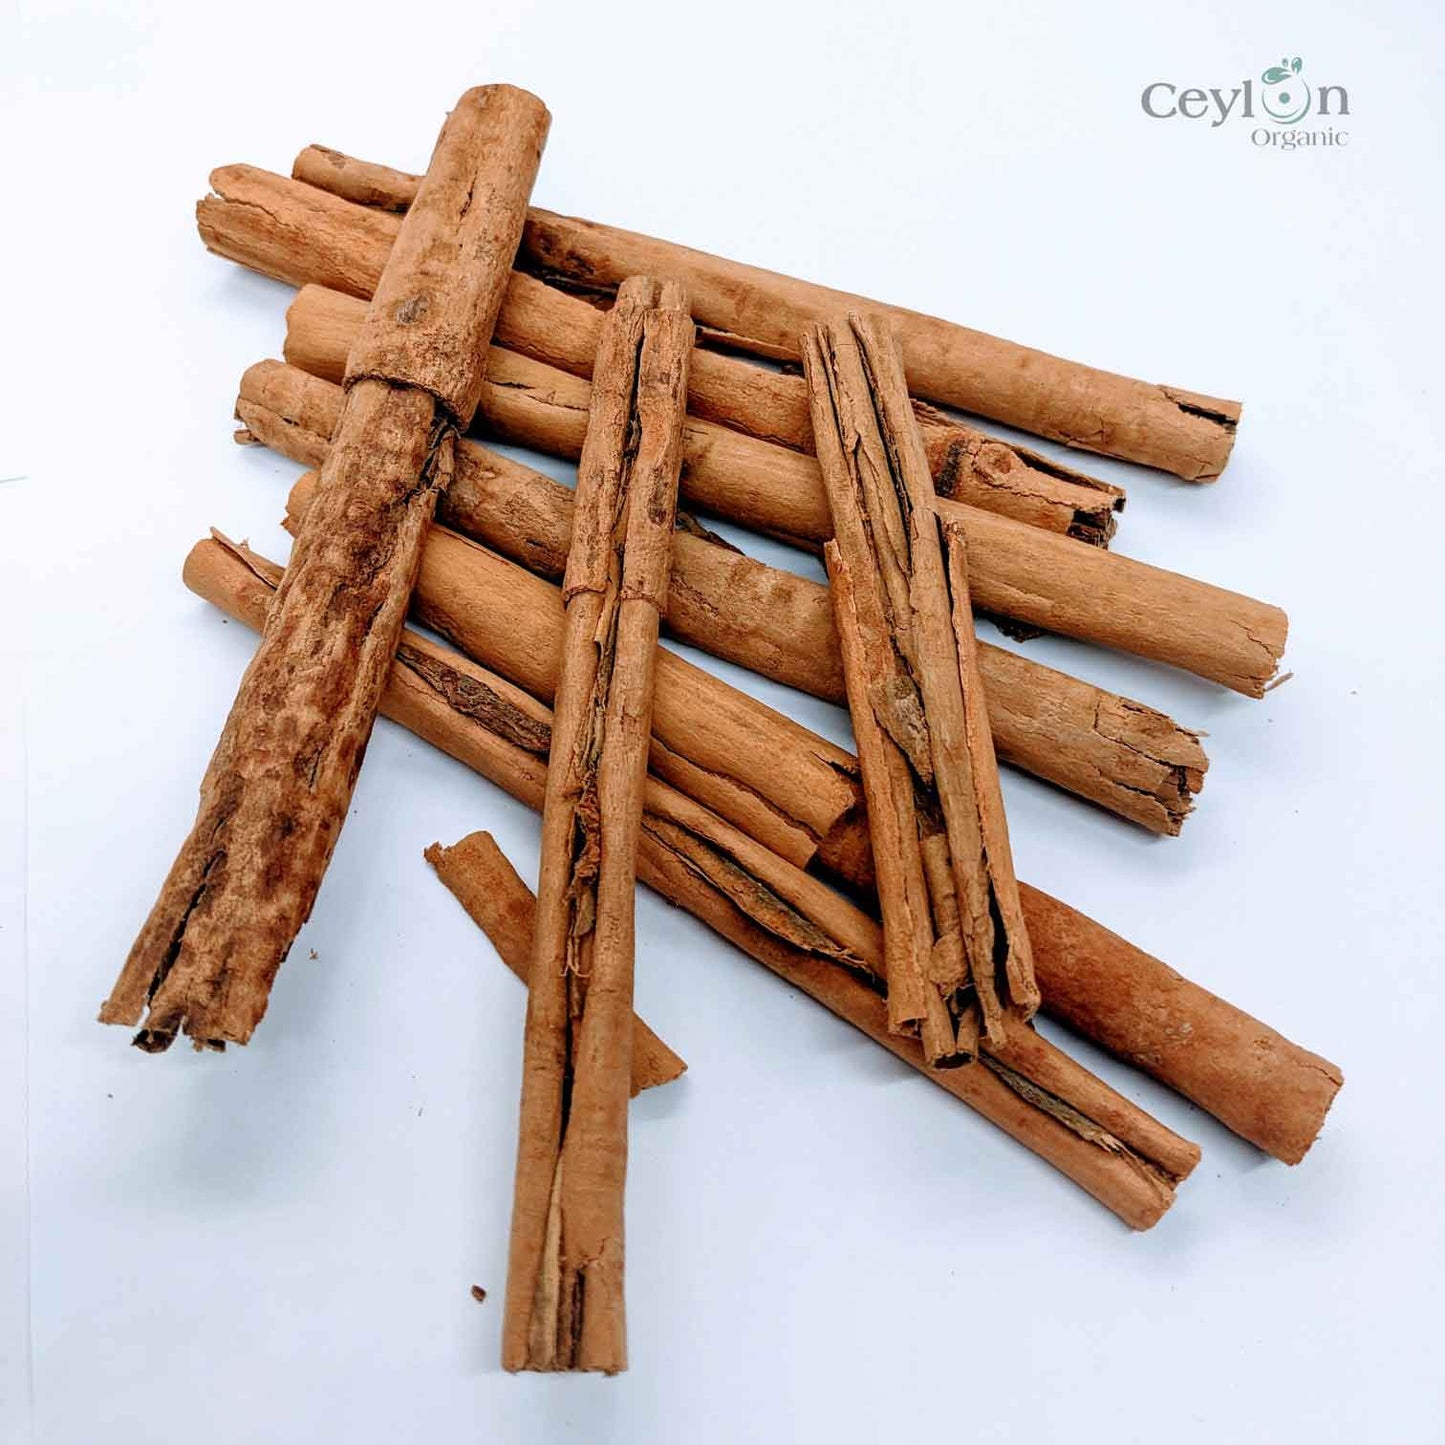 2kg+ Cinnamon Sticks - The Perfect Spice for Baking, Cooking, and Tea | Ceylon Organic-4